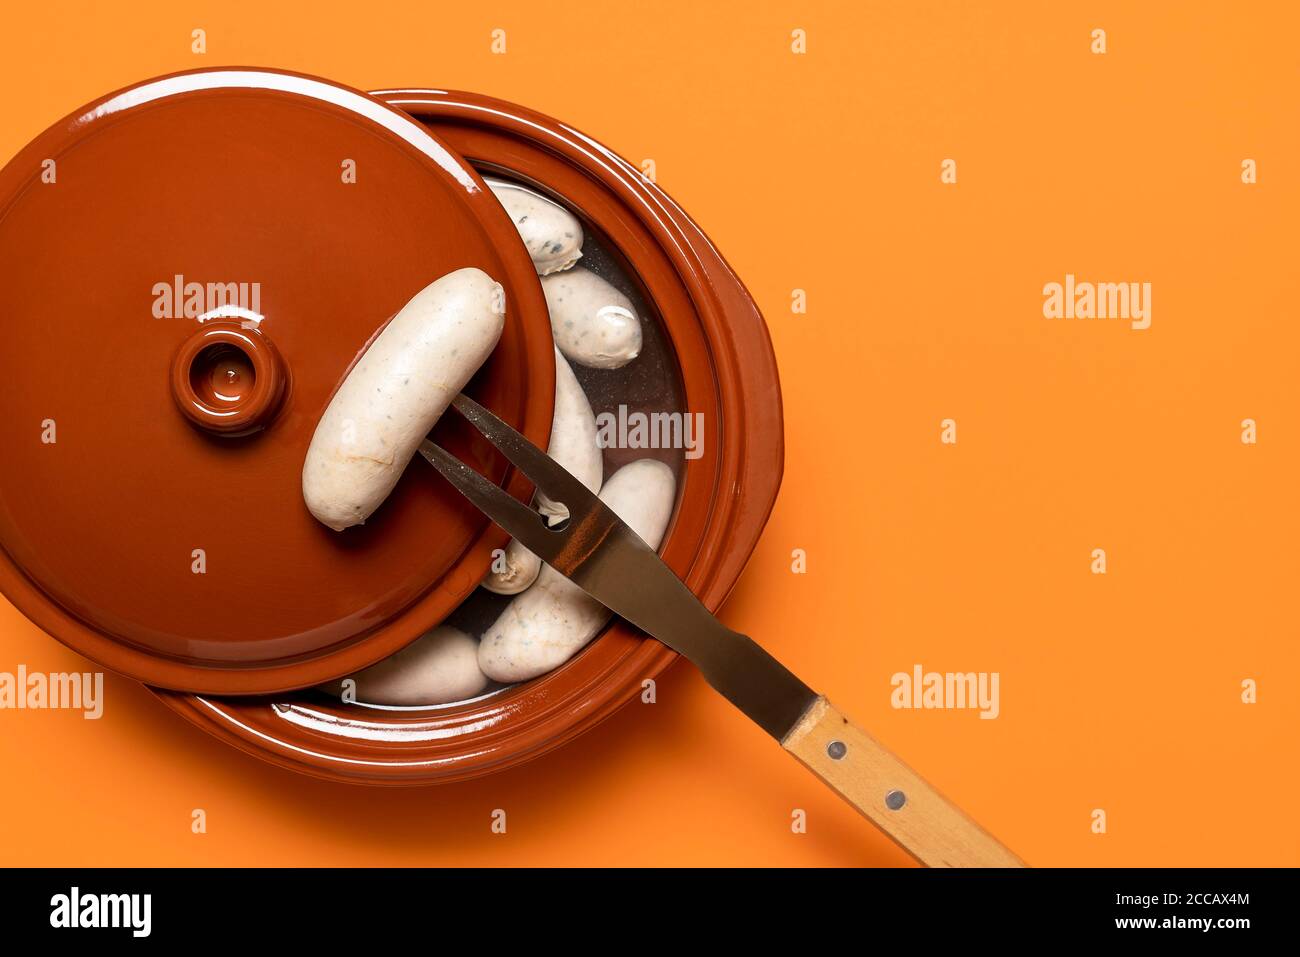 Boiled weisswurst, german white sausage cooked in a ceramic pot, on orange background. Top view of bavarian veal sausage. Germany national food. Stock Photo